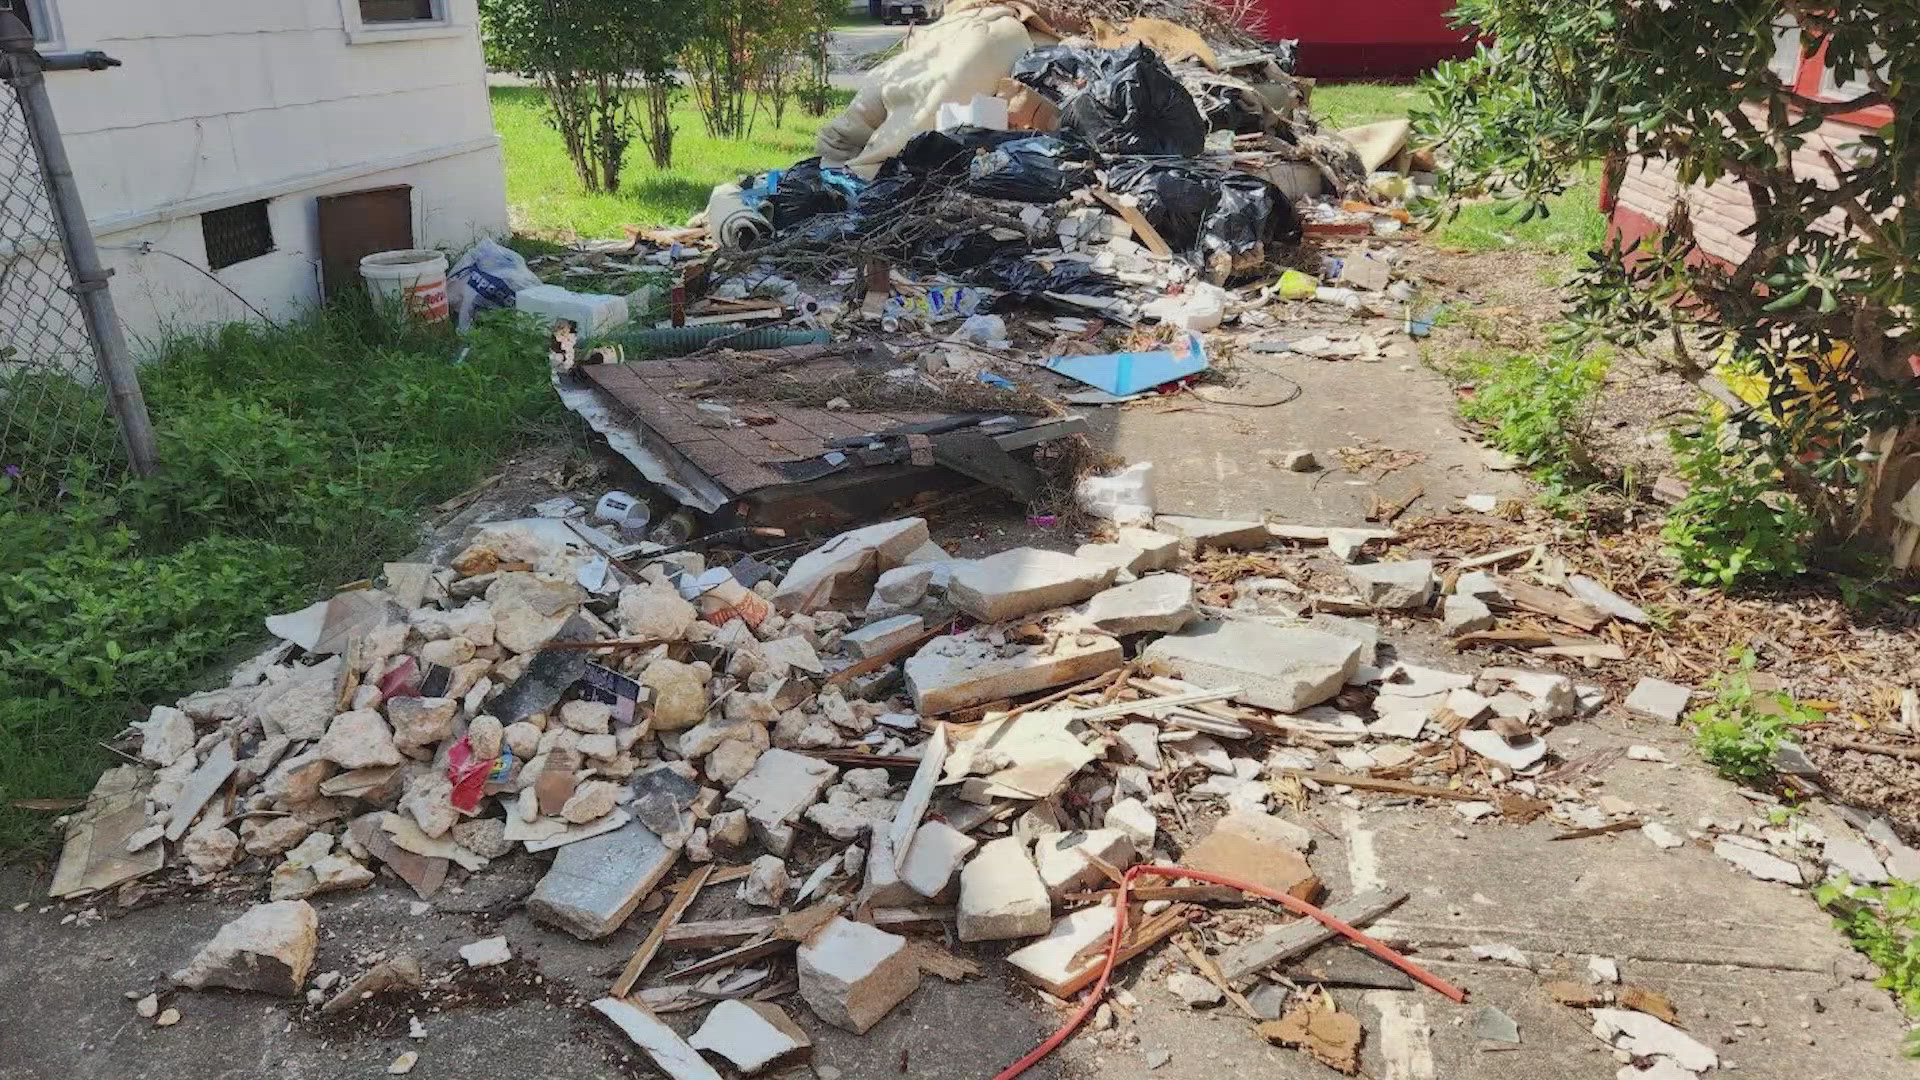 Massive junkpile in southeast side neighborhood has been cleaned up